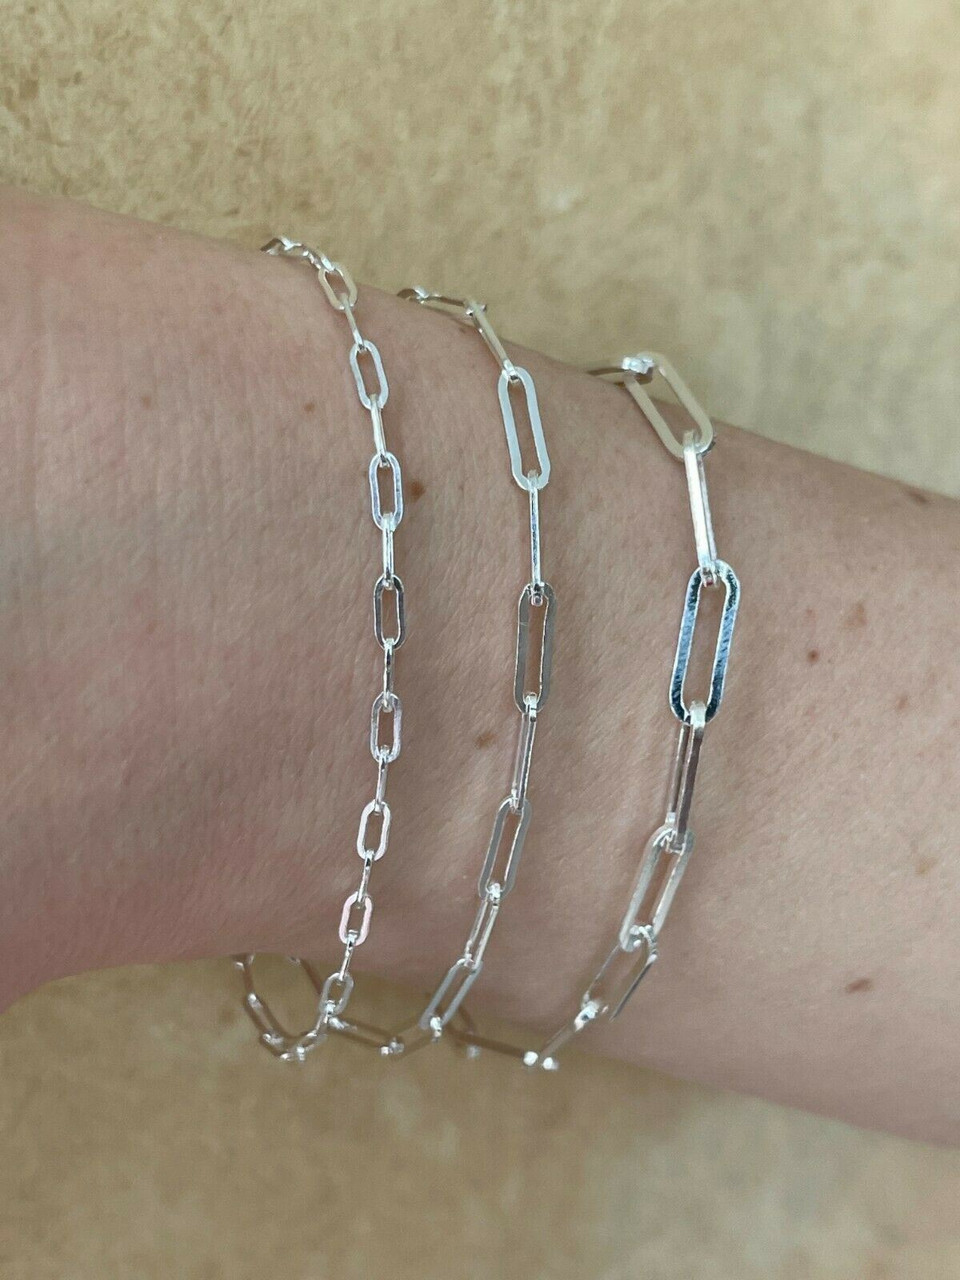 Real Solid 925 Sterling Silver Paperclip Bracelet